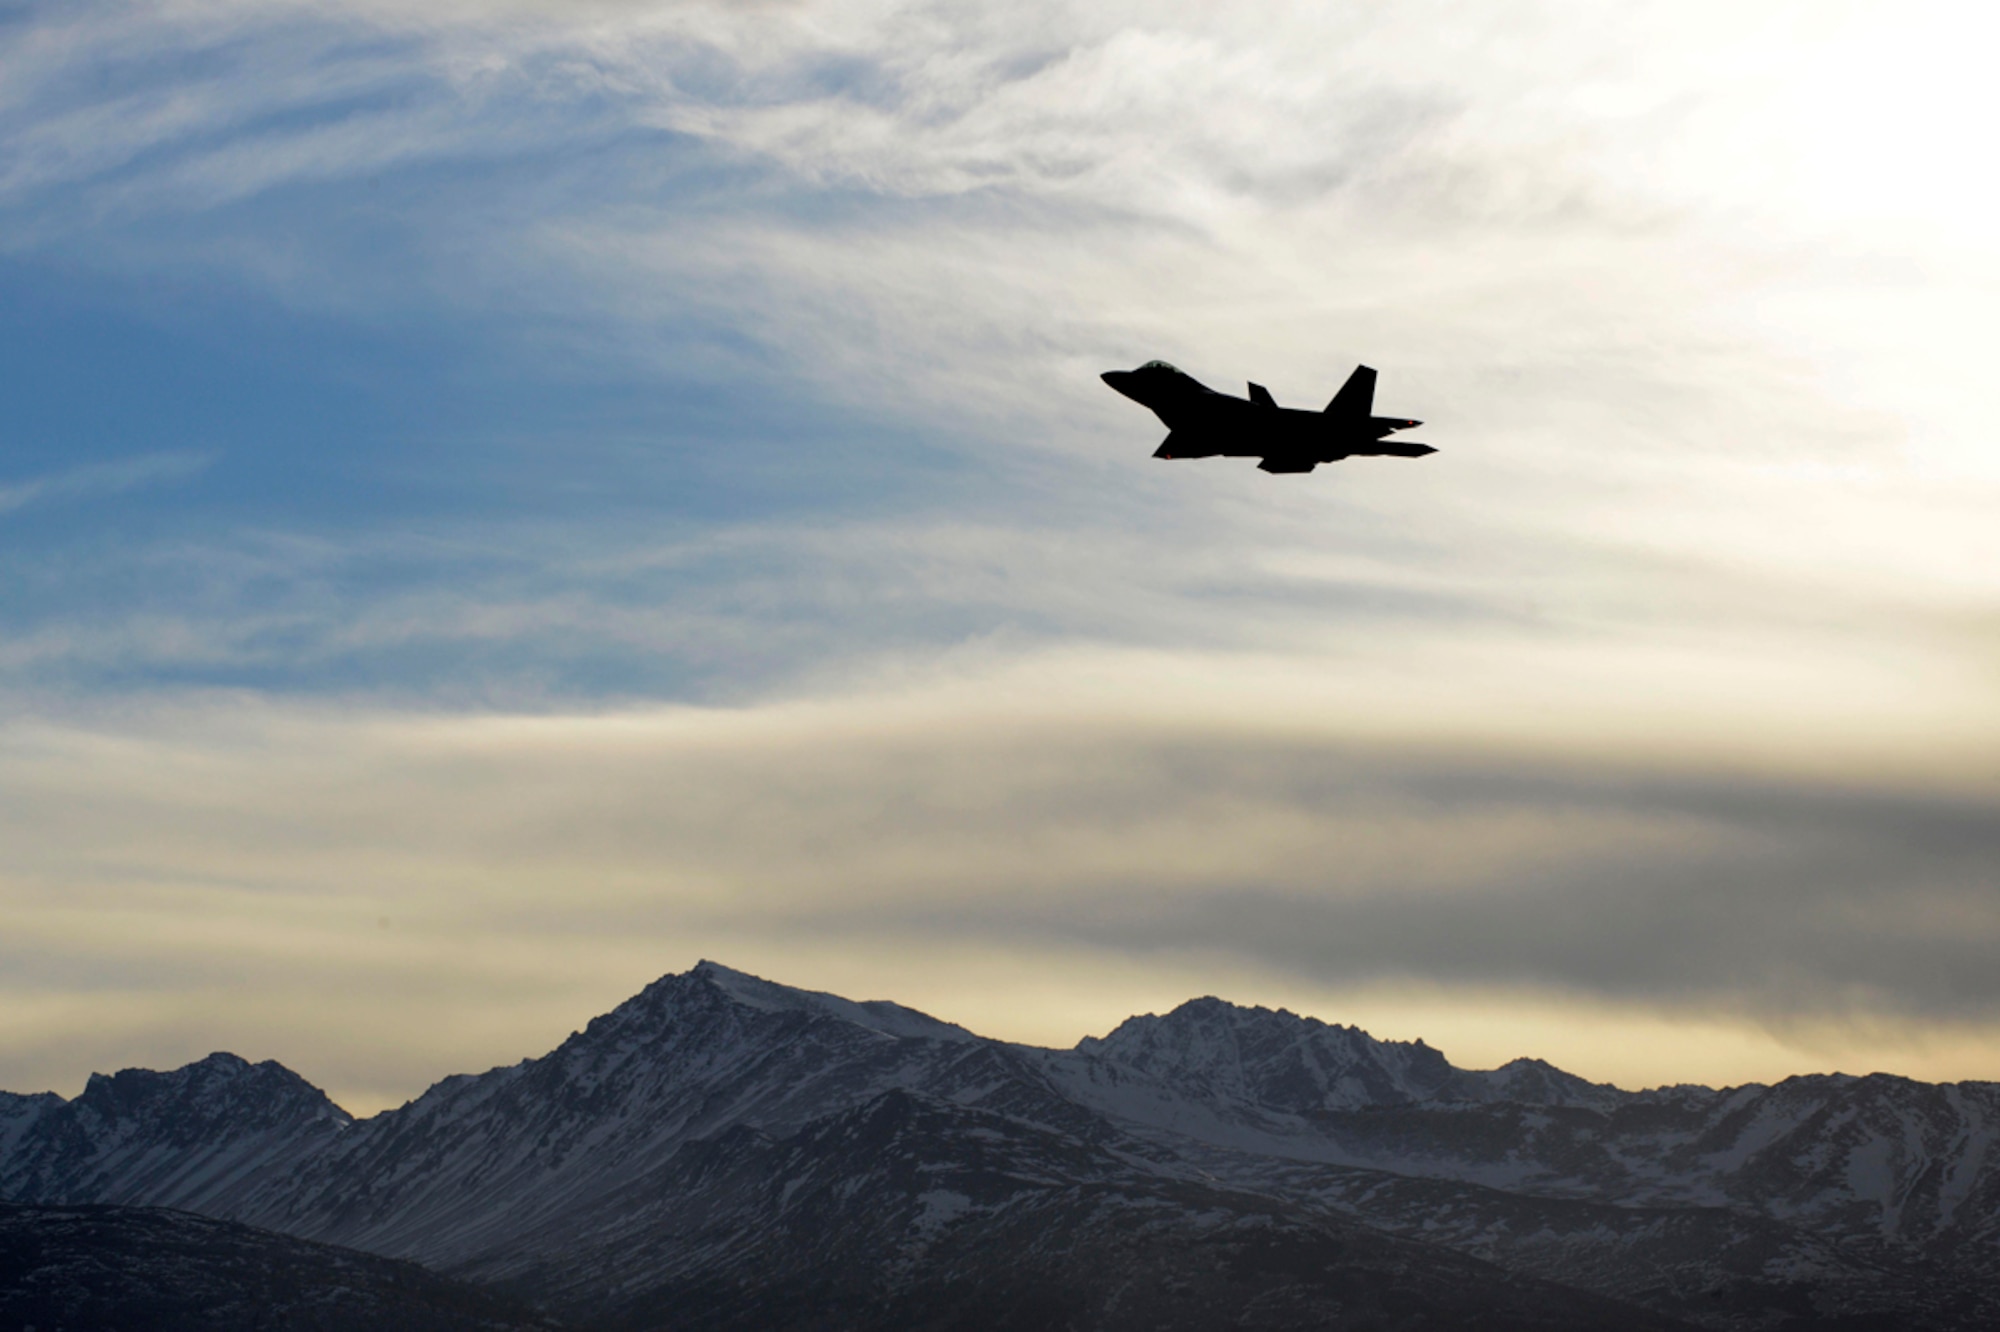 An F-22 Raptor flies over Joint Base Elmendorf-Richardson, Alaska during Exercise Polar Force 14-2, Feb. 10, 2014. The exercise is designed to validate JBER’s ability to integrate, mobilize and prepare assigned personnel, aircraft and equipment for a wartime mission. (U.S. Air Force photo/Staff Sgt. Sheila deVera)